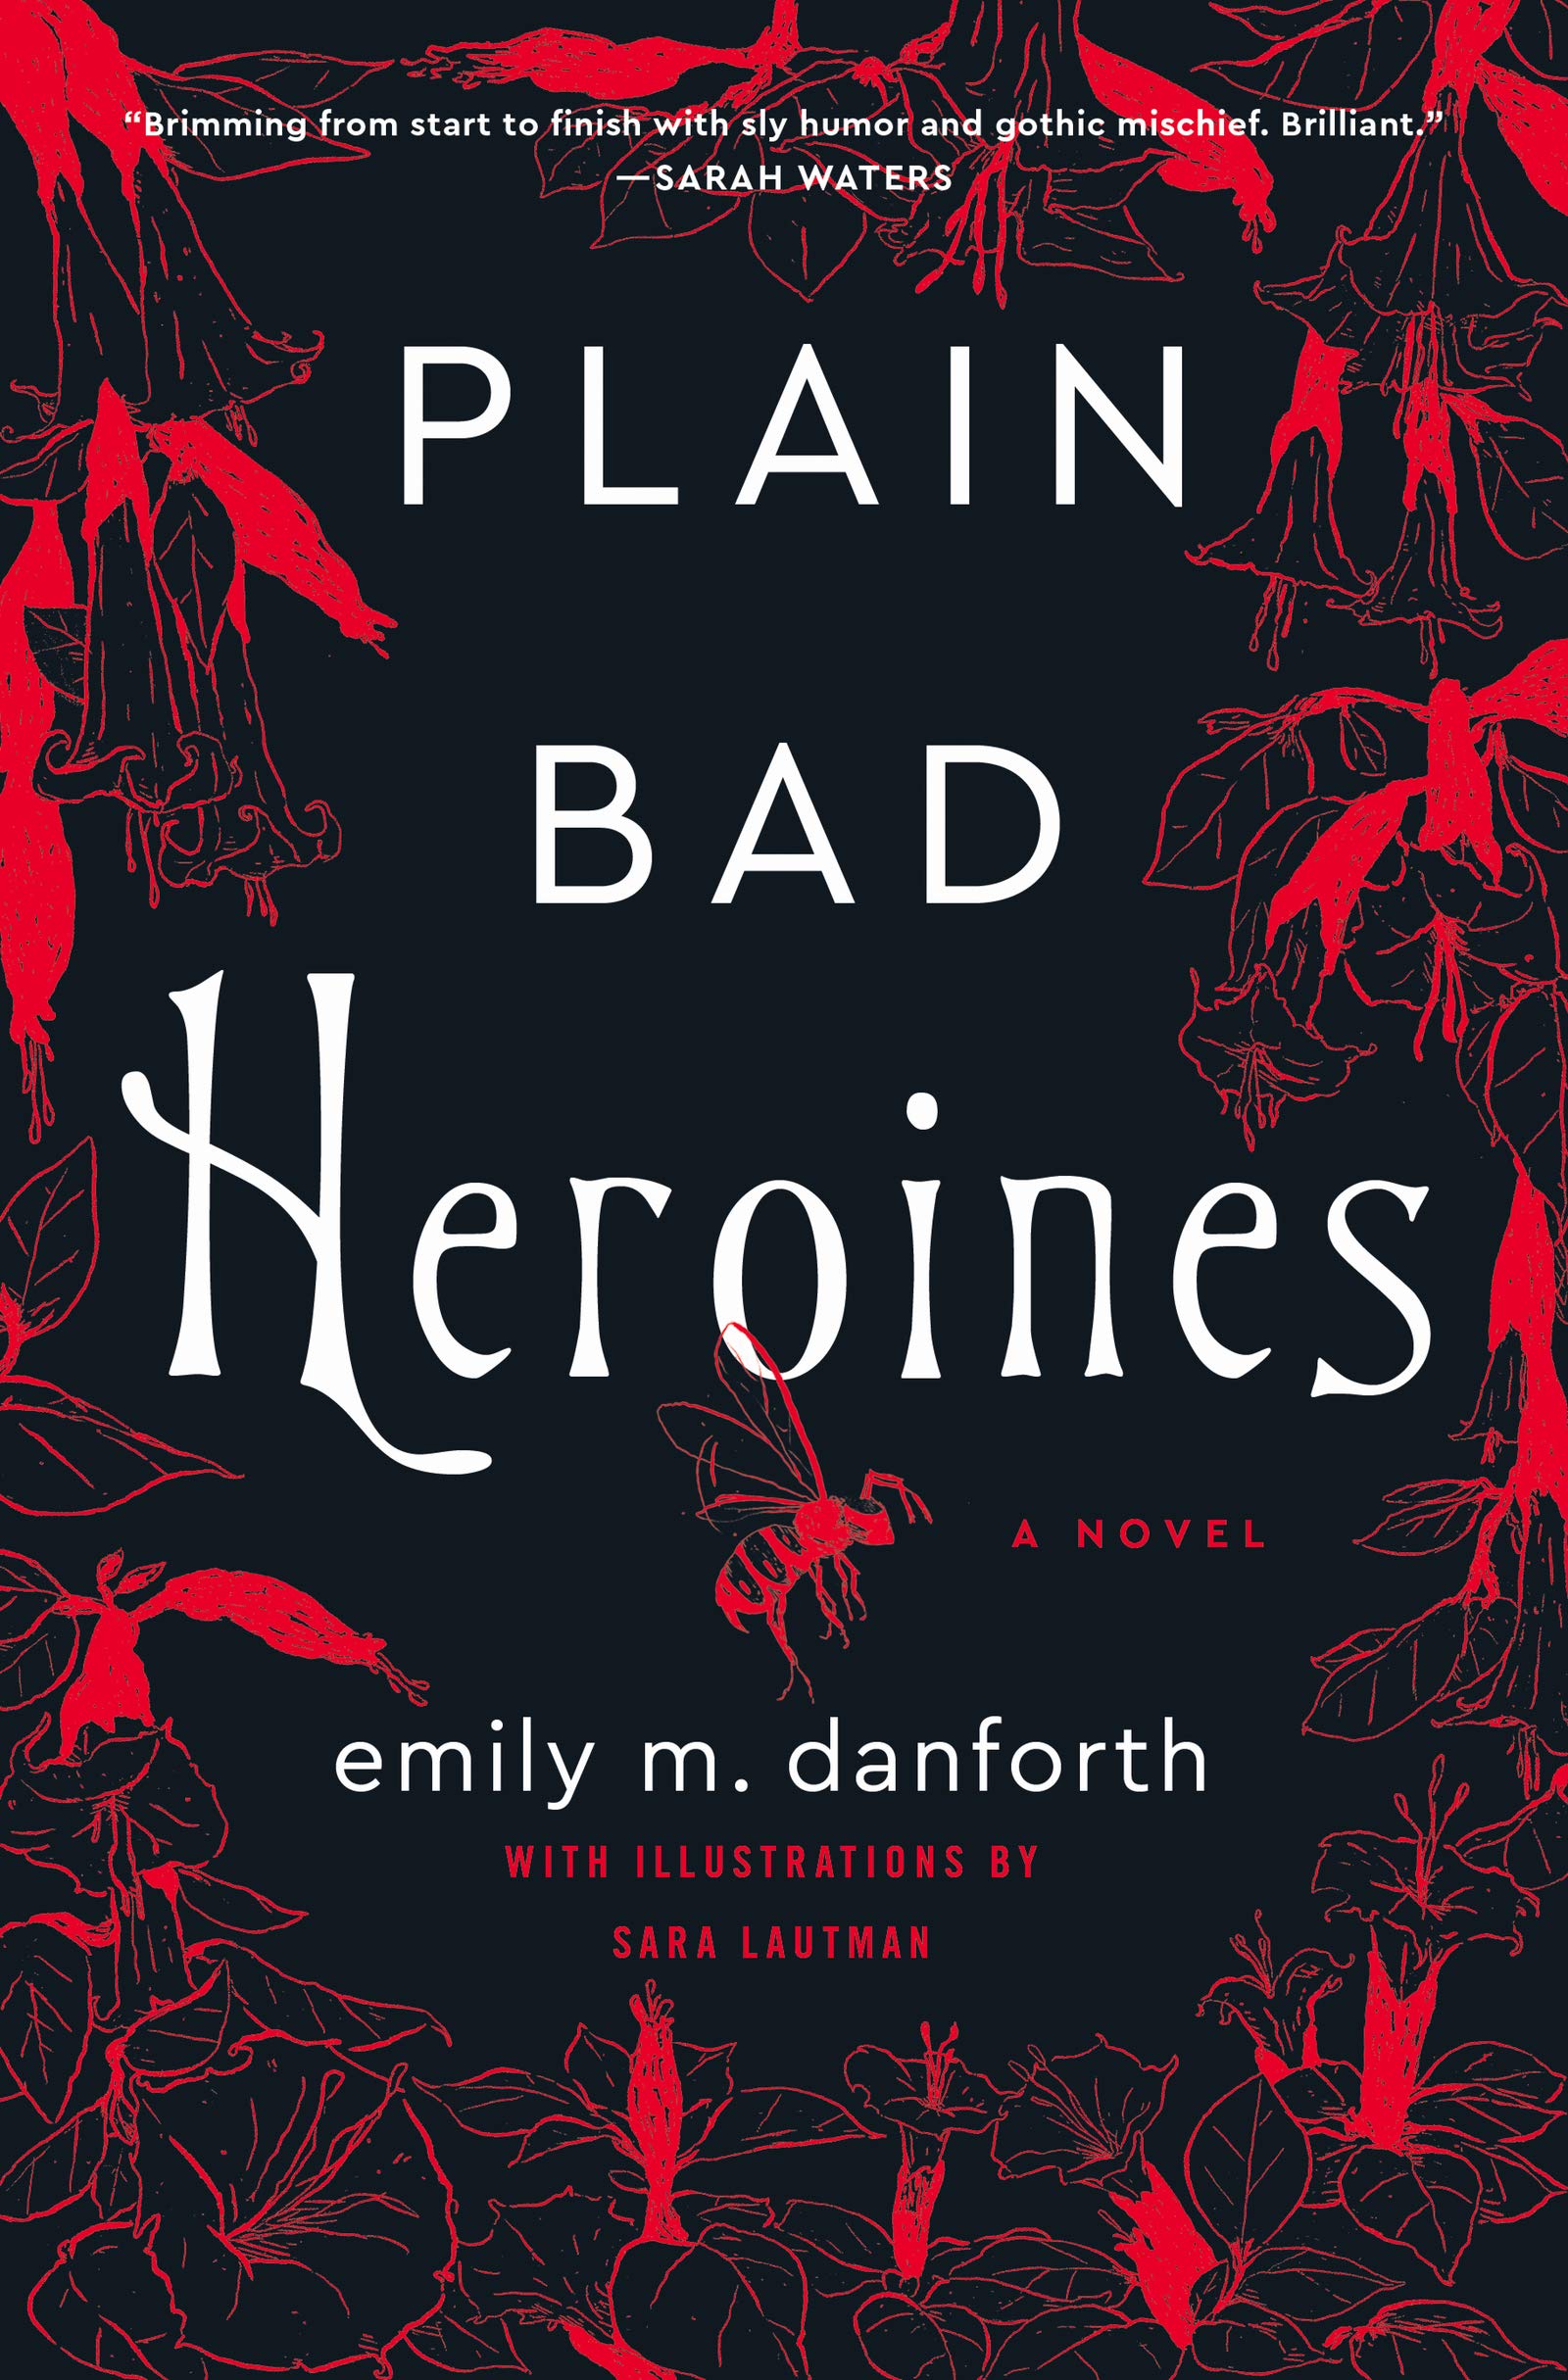 The cover of Plain Bad Heroines by Emily M. Danforth